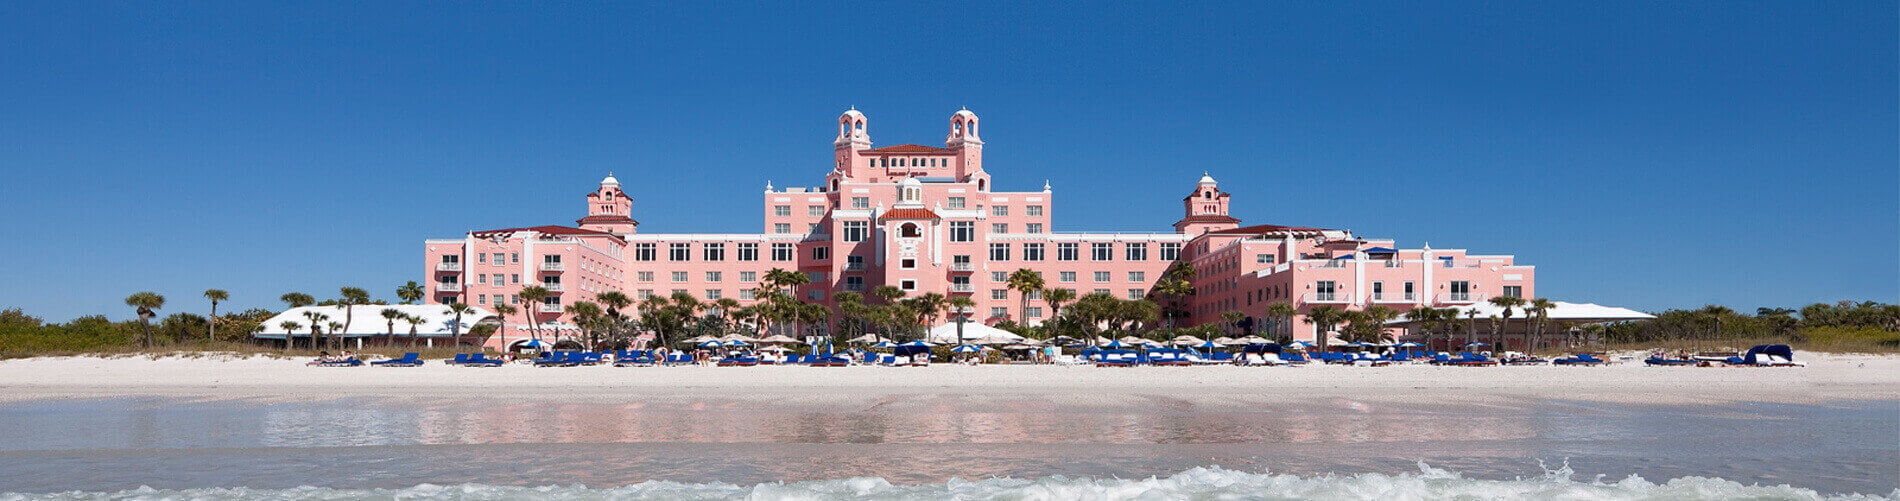 Don Cesar, a pink hotel located on the beach in Florida